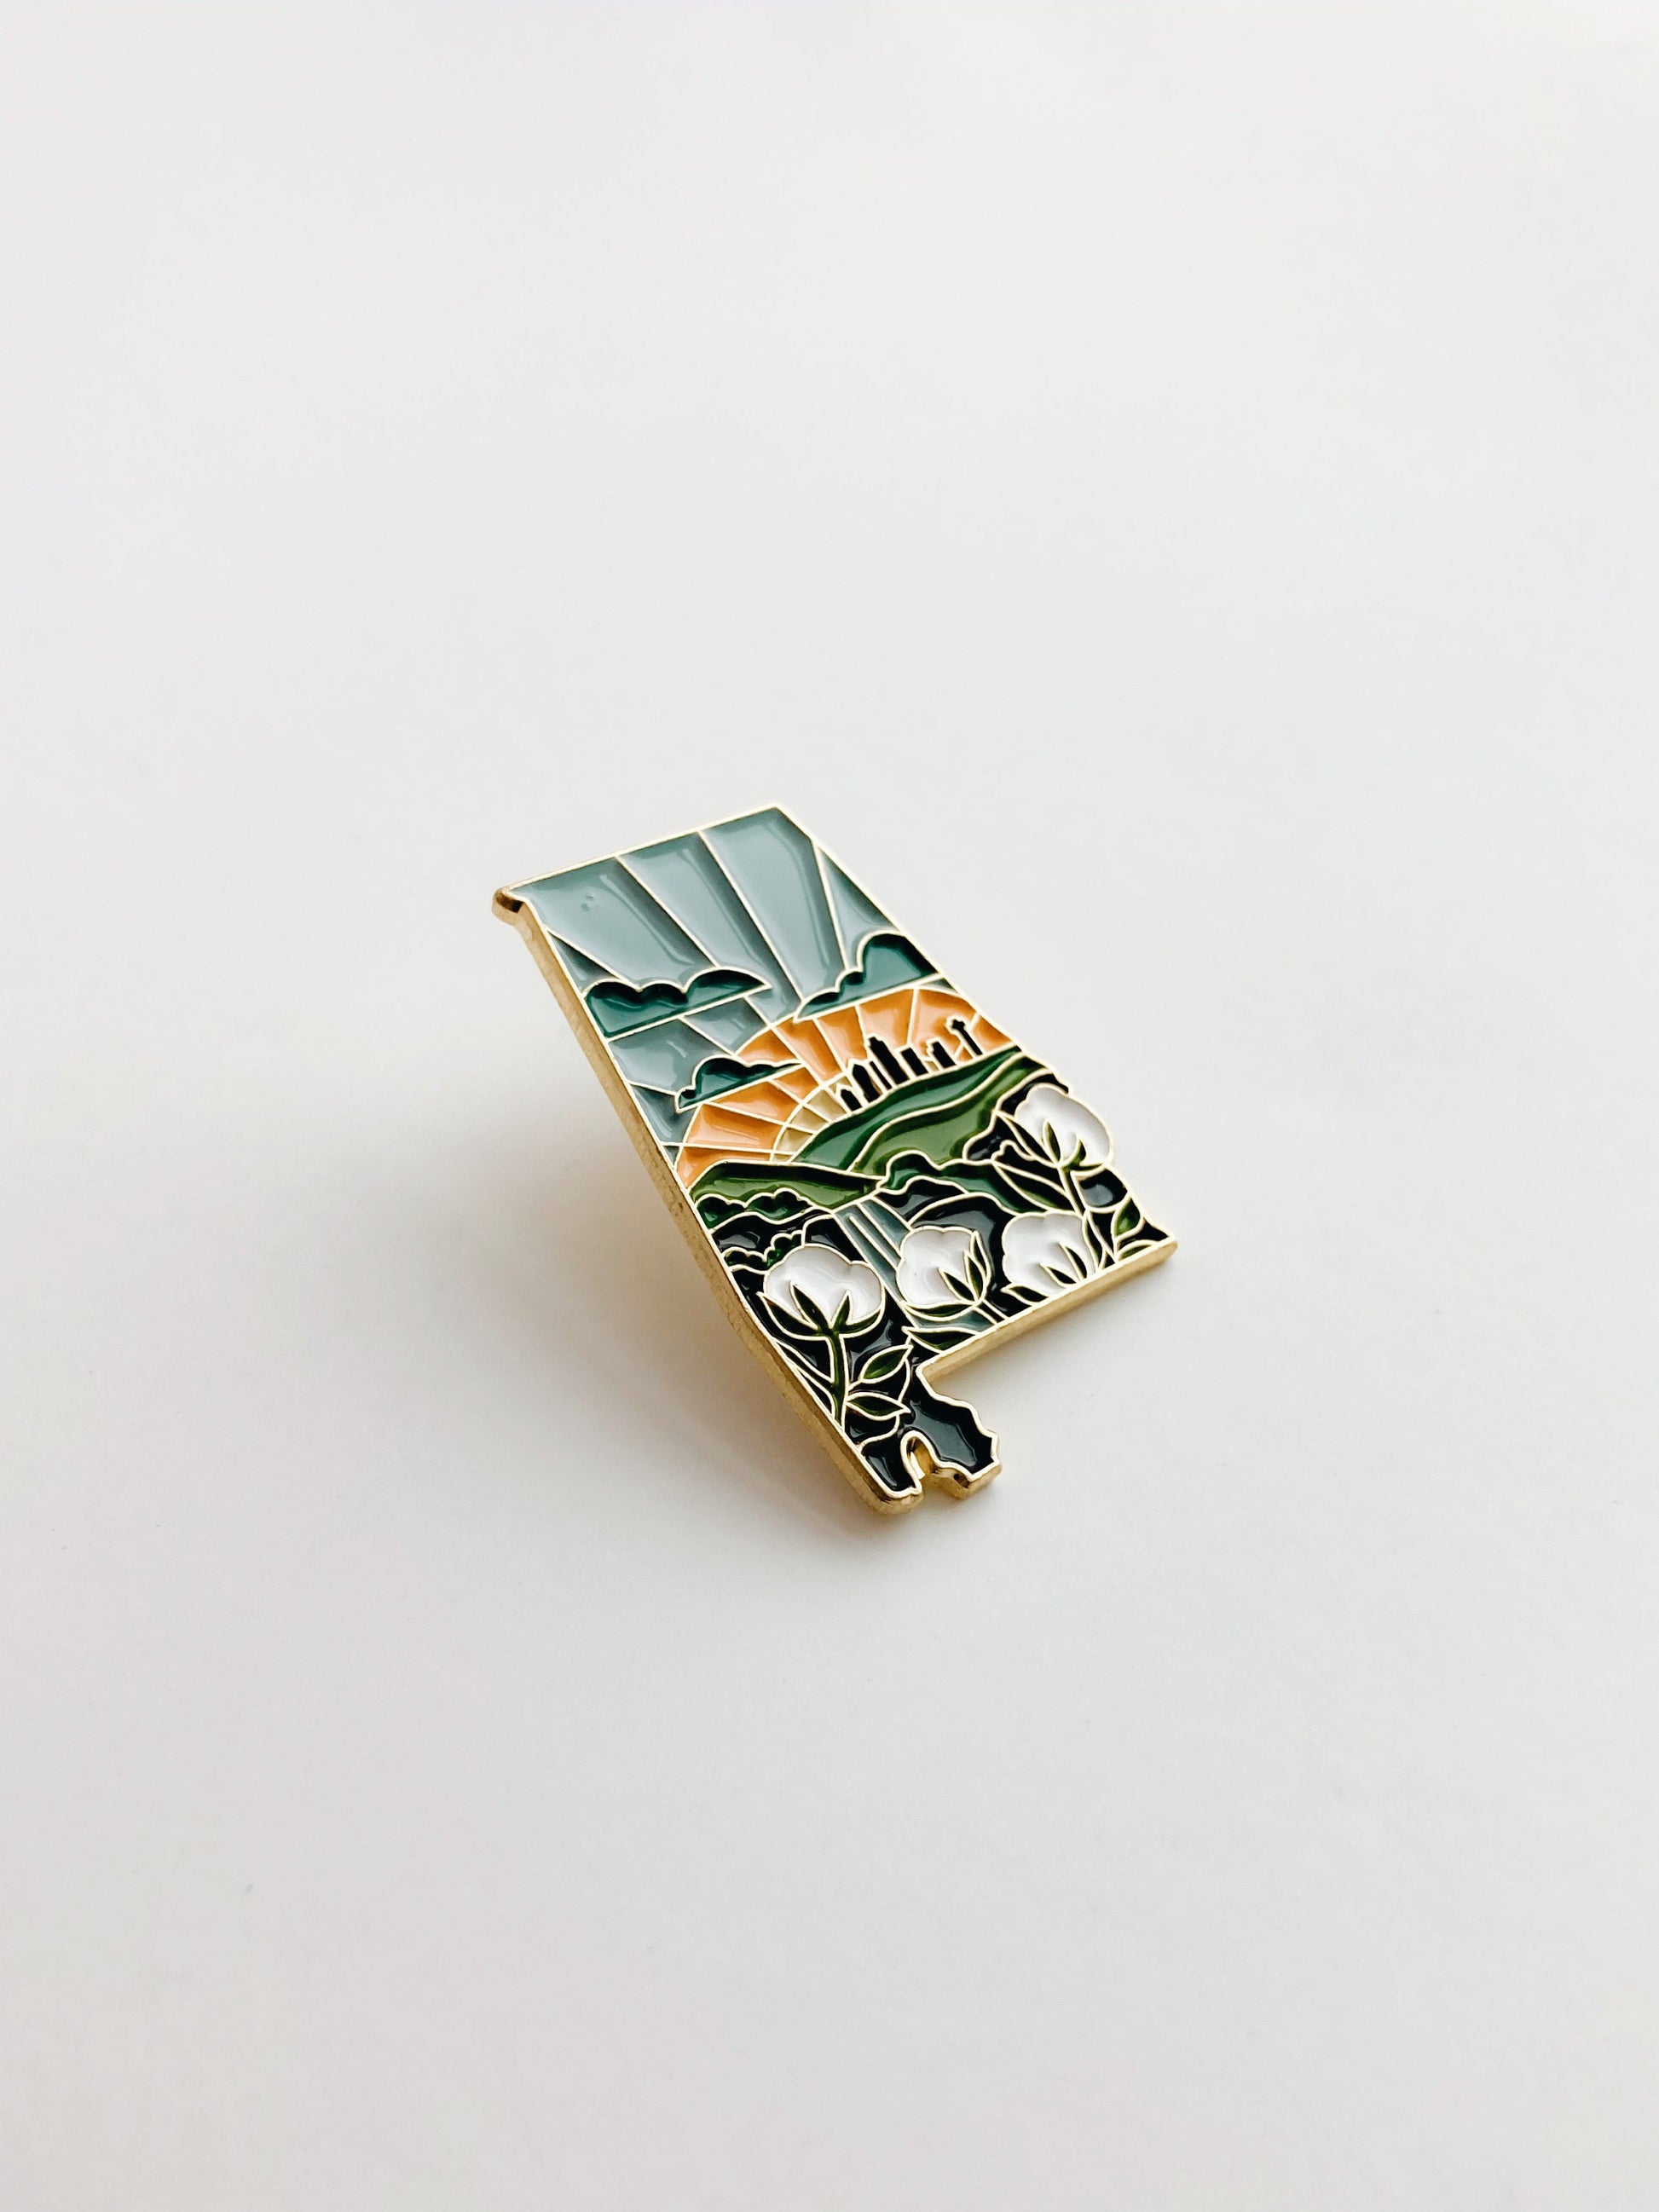 Alabama Enamel Pin | Gold Soft Enamel Pin | Illustrated United States Pin | Butterfly Clasp | 1.25"